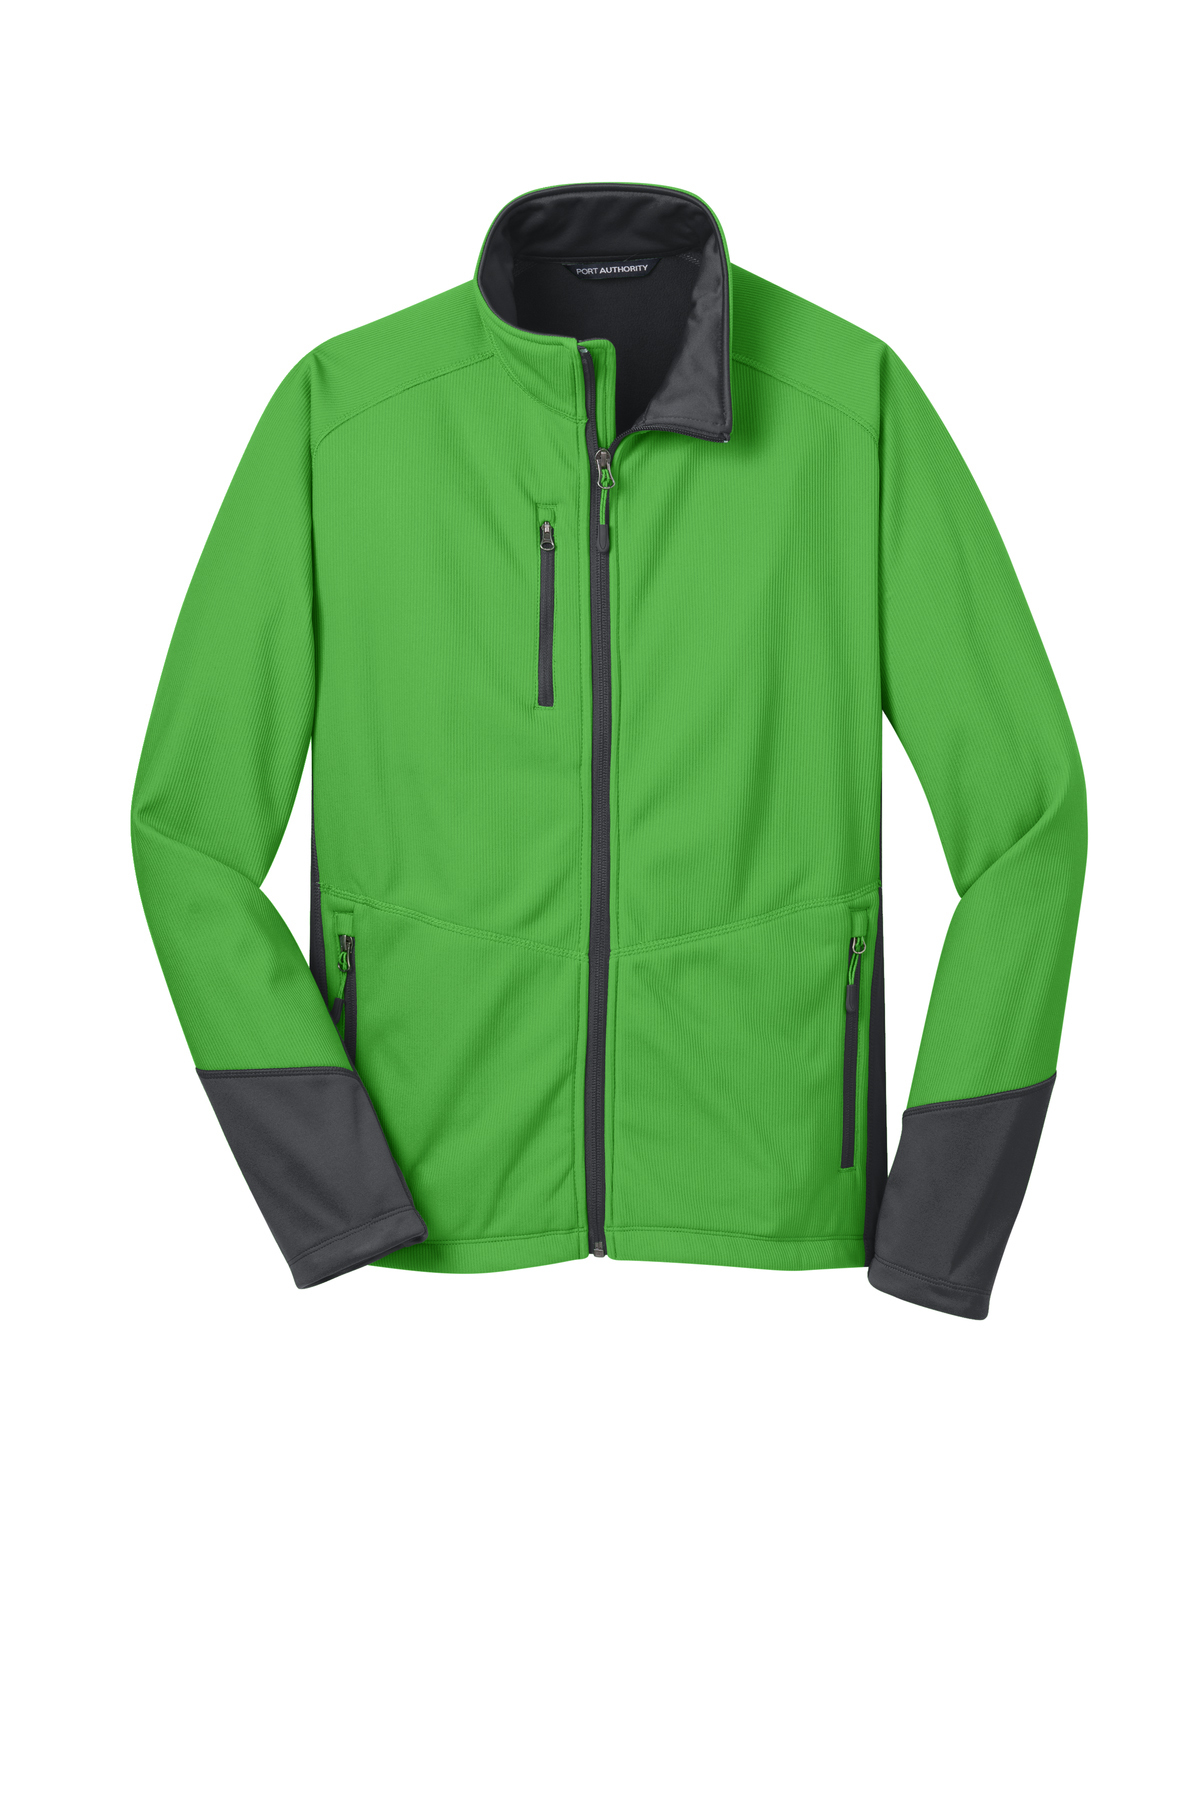 Port Authority Vertical Soft Shell Jacket | Product | SanMar